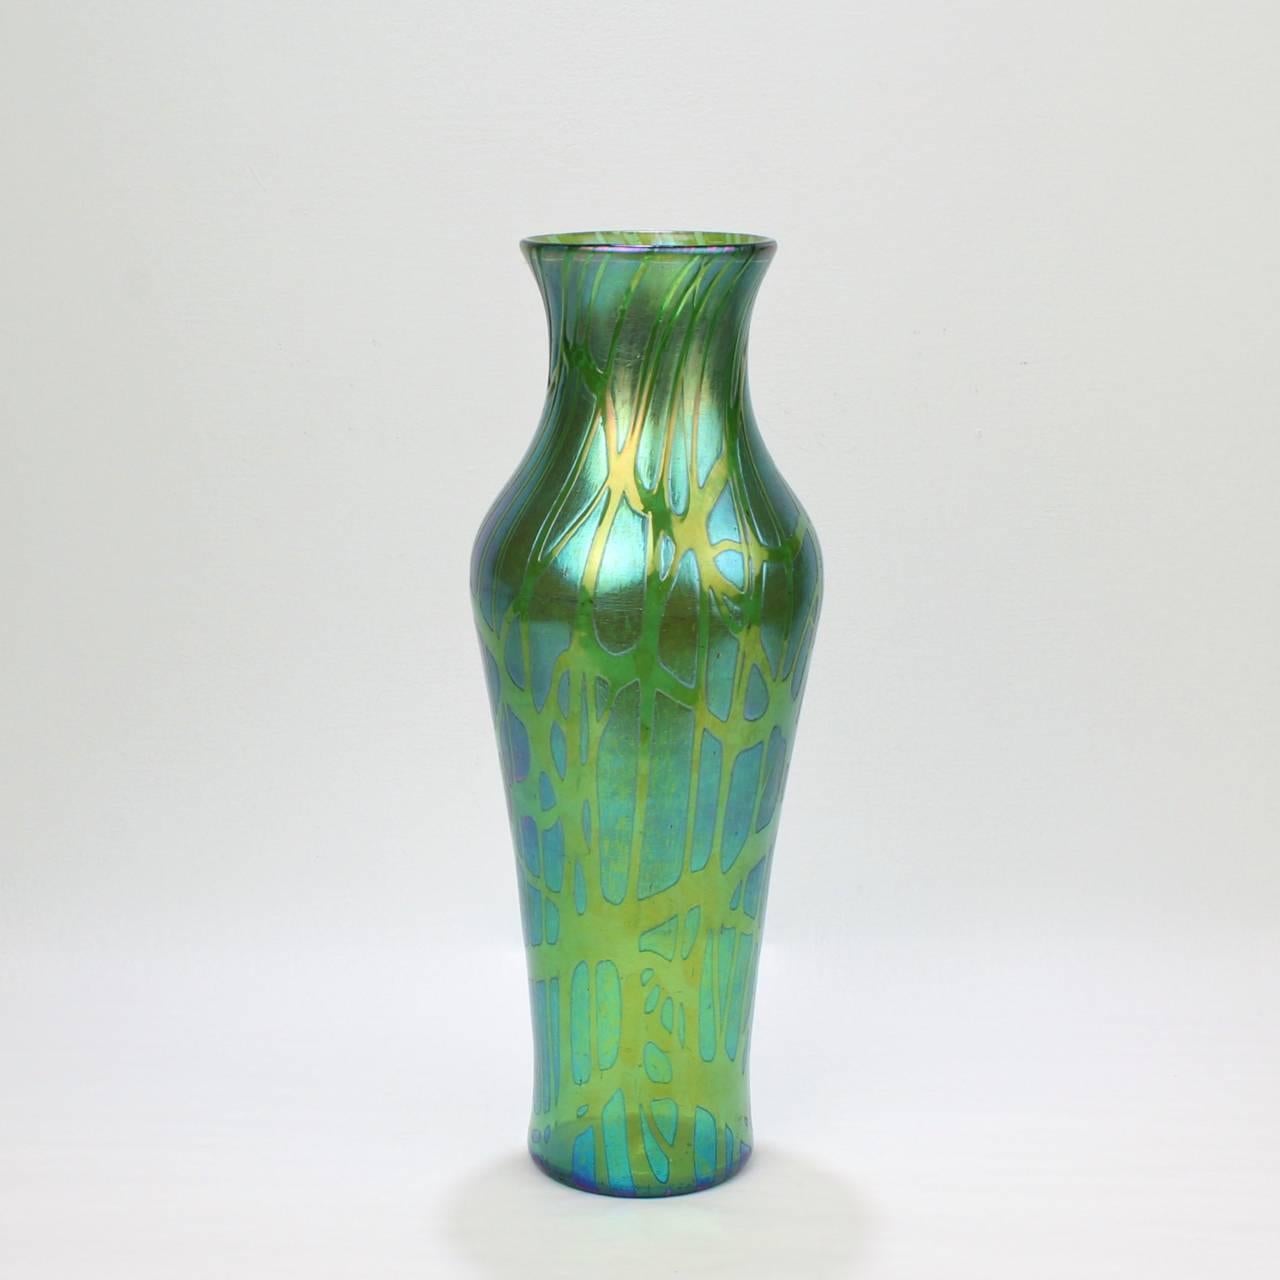 A good, large early 20th century Loetz art glass vase. 

With a vasiform body and pulled thread and green Crete Pampas decoration.

Measures: Height ca. 13 3/4 in.

Items purchased from David Sterner Antiques must delight you. Purchases may be